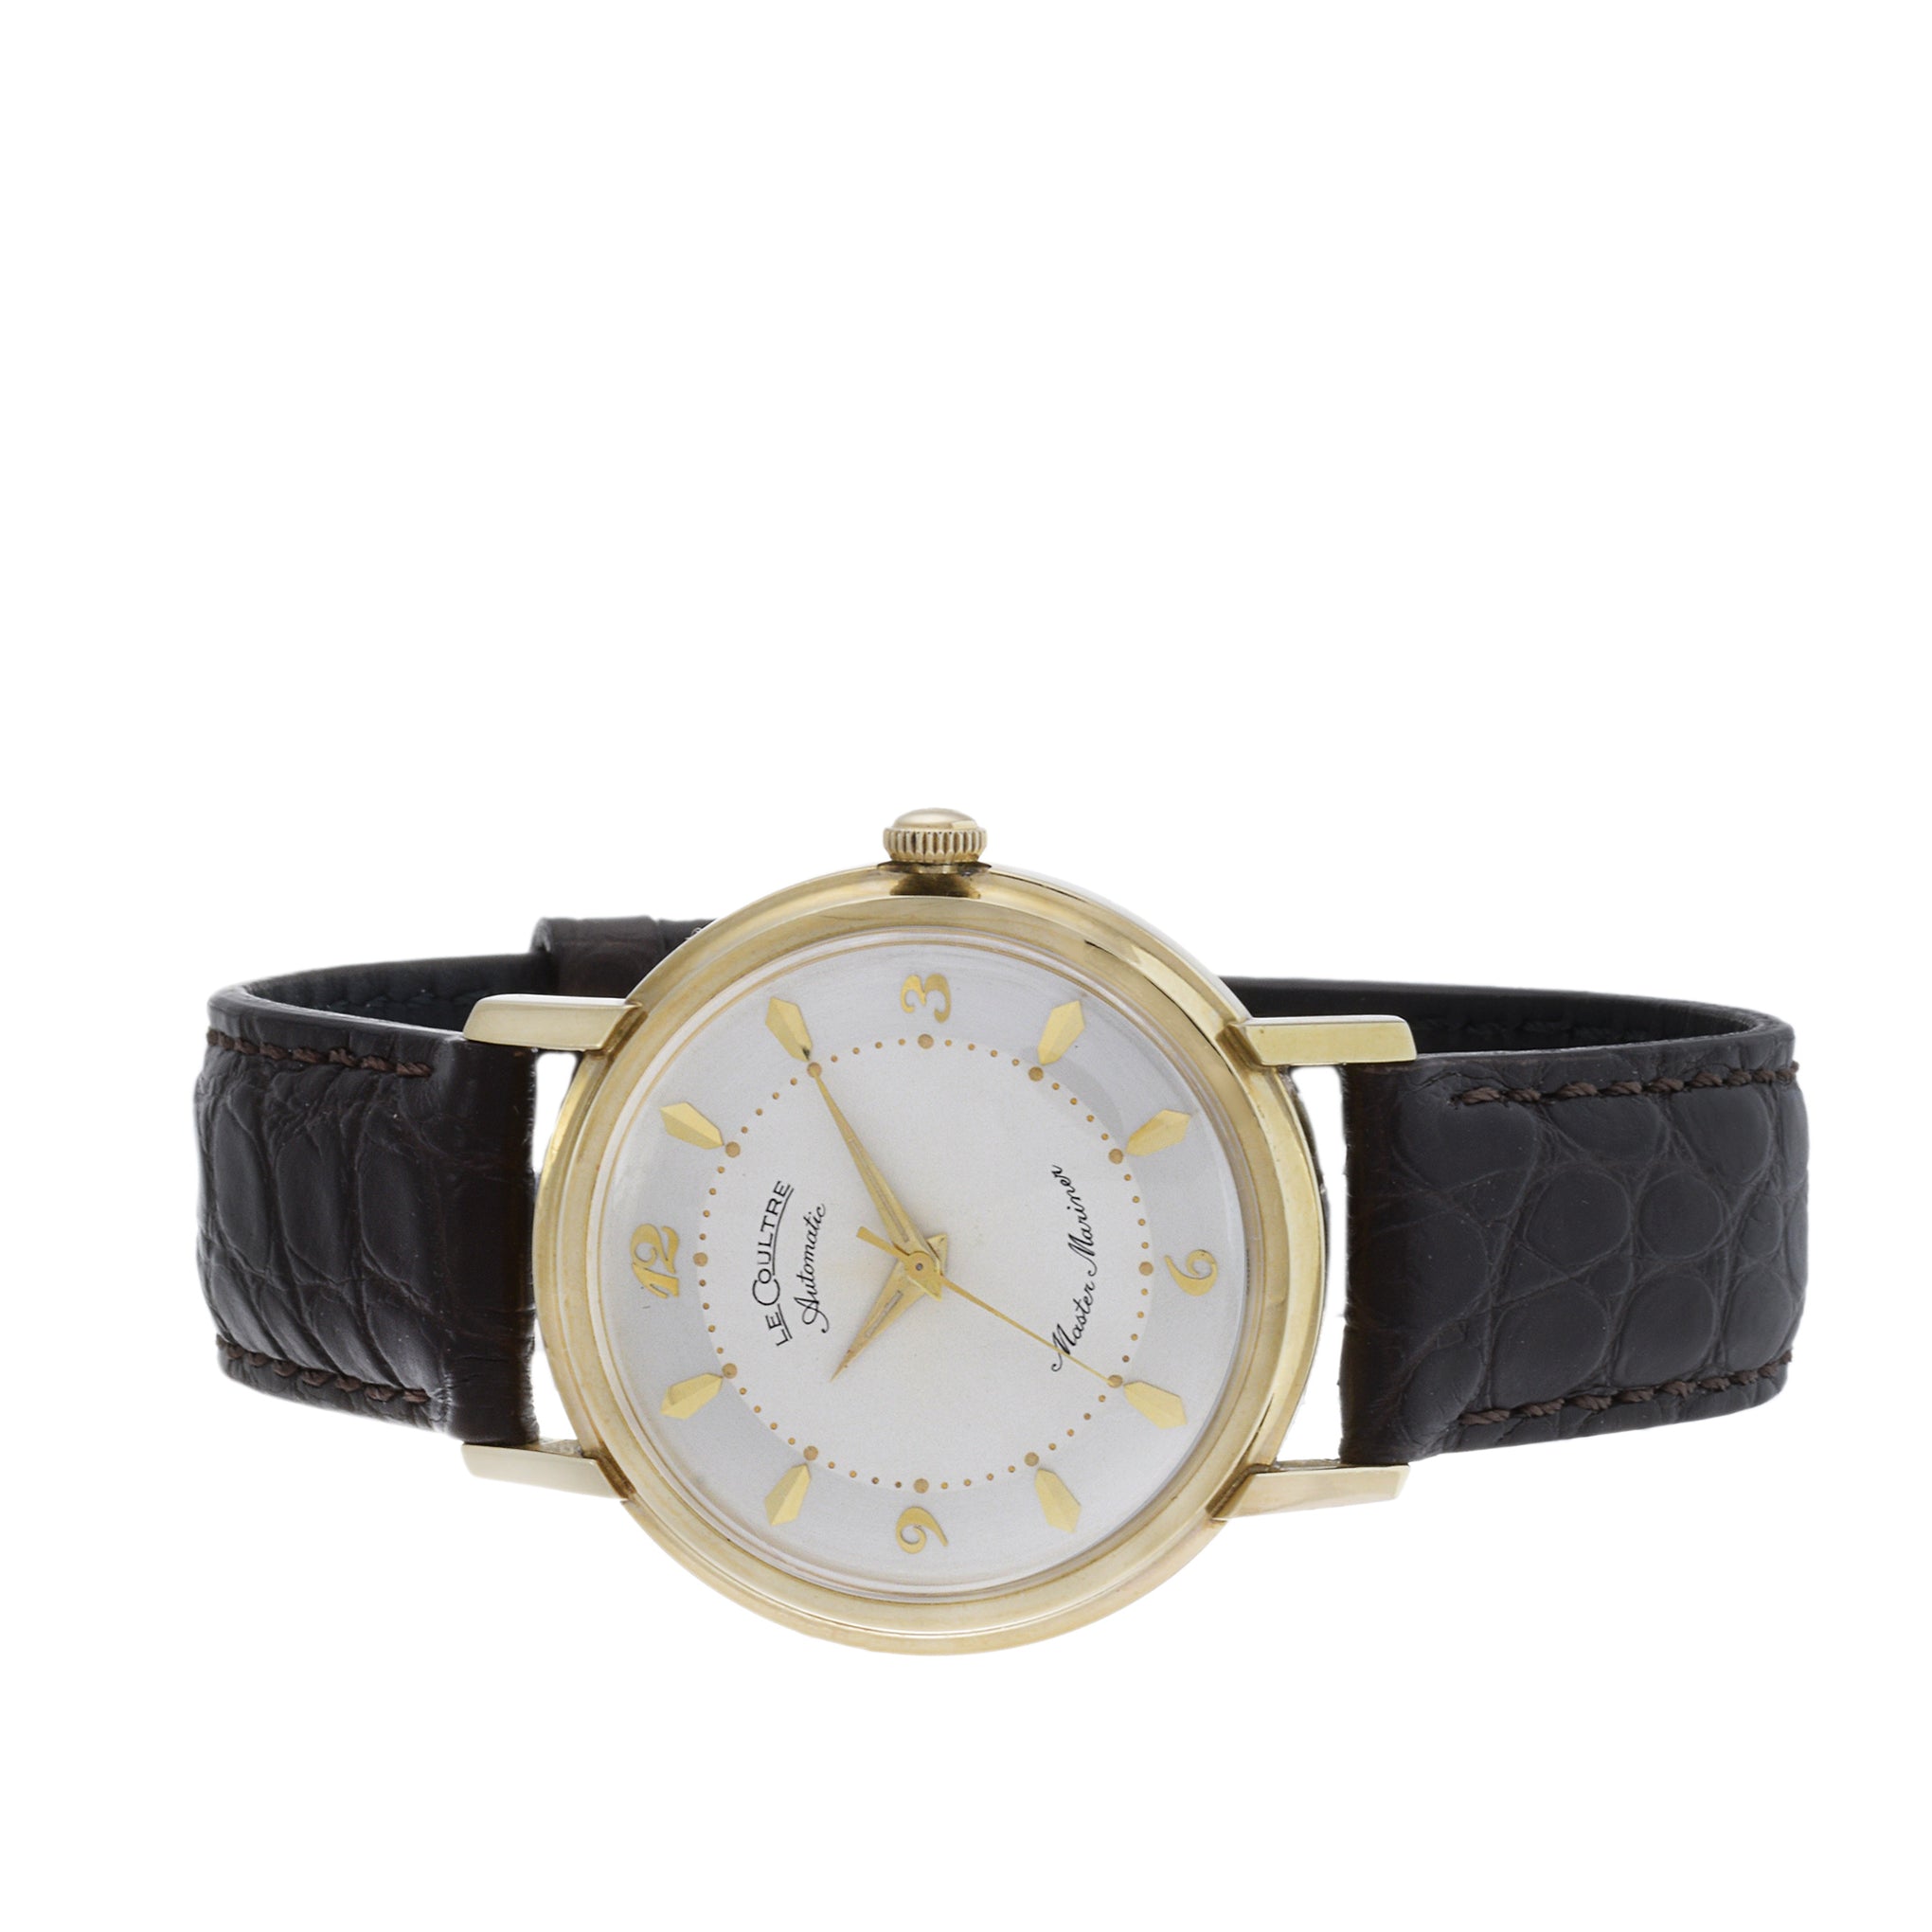 Jaeger-LeCoultre Master Mariner 14K Yellow Gold Automatic